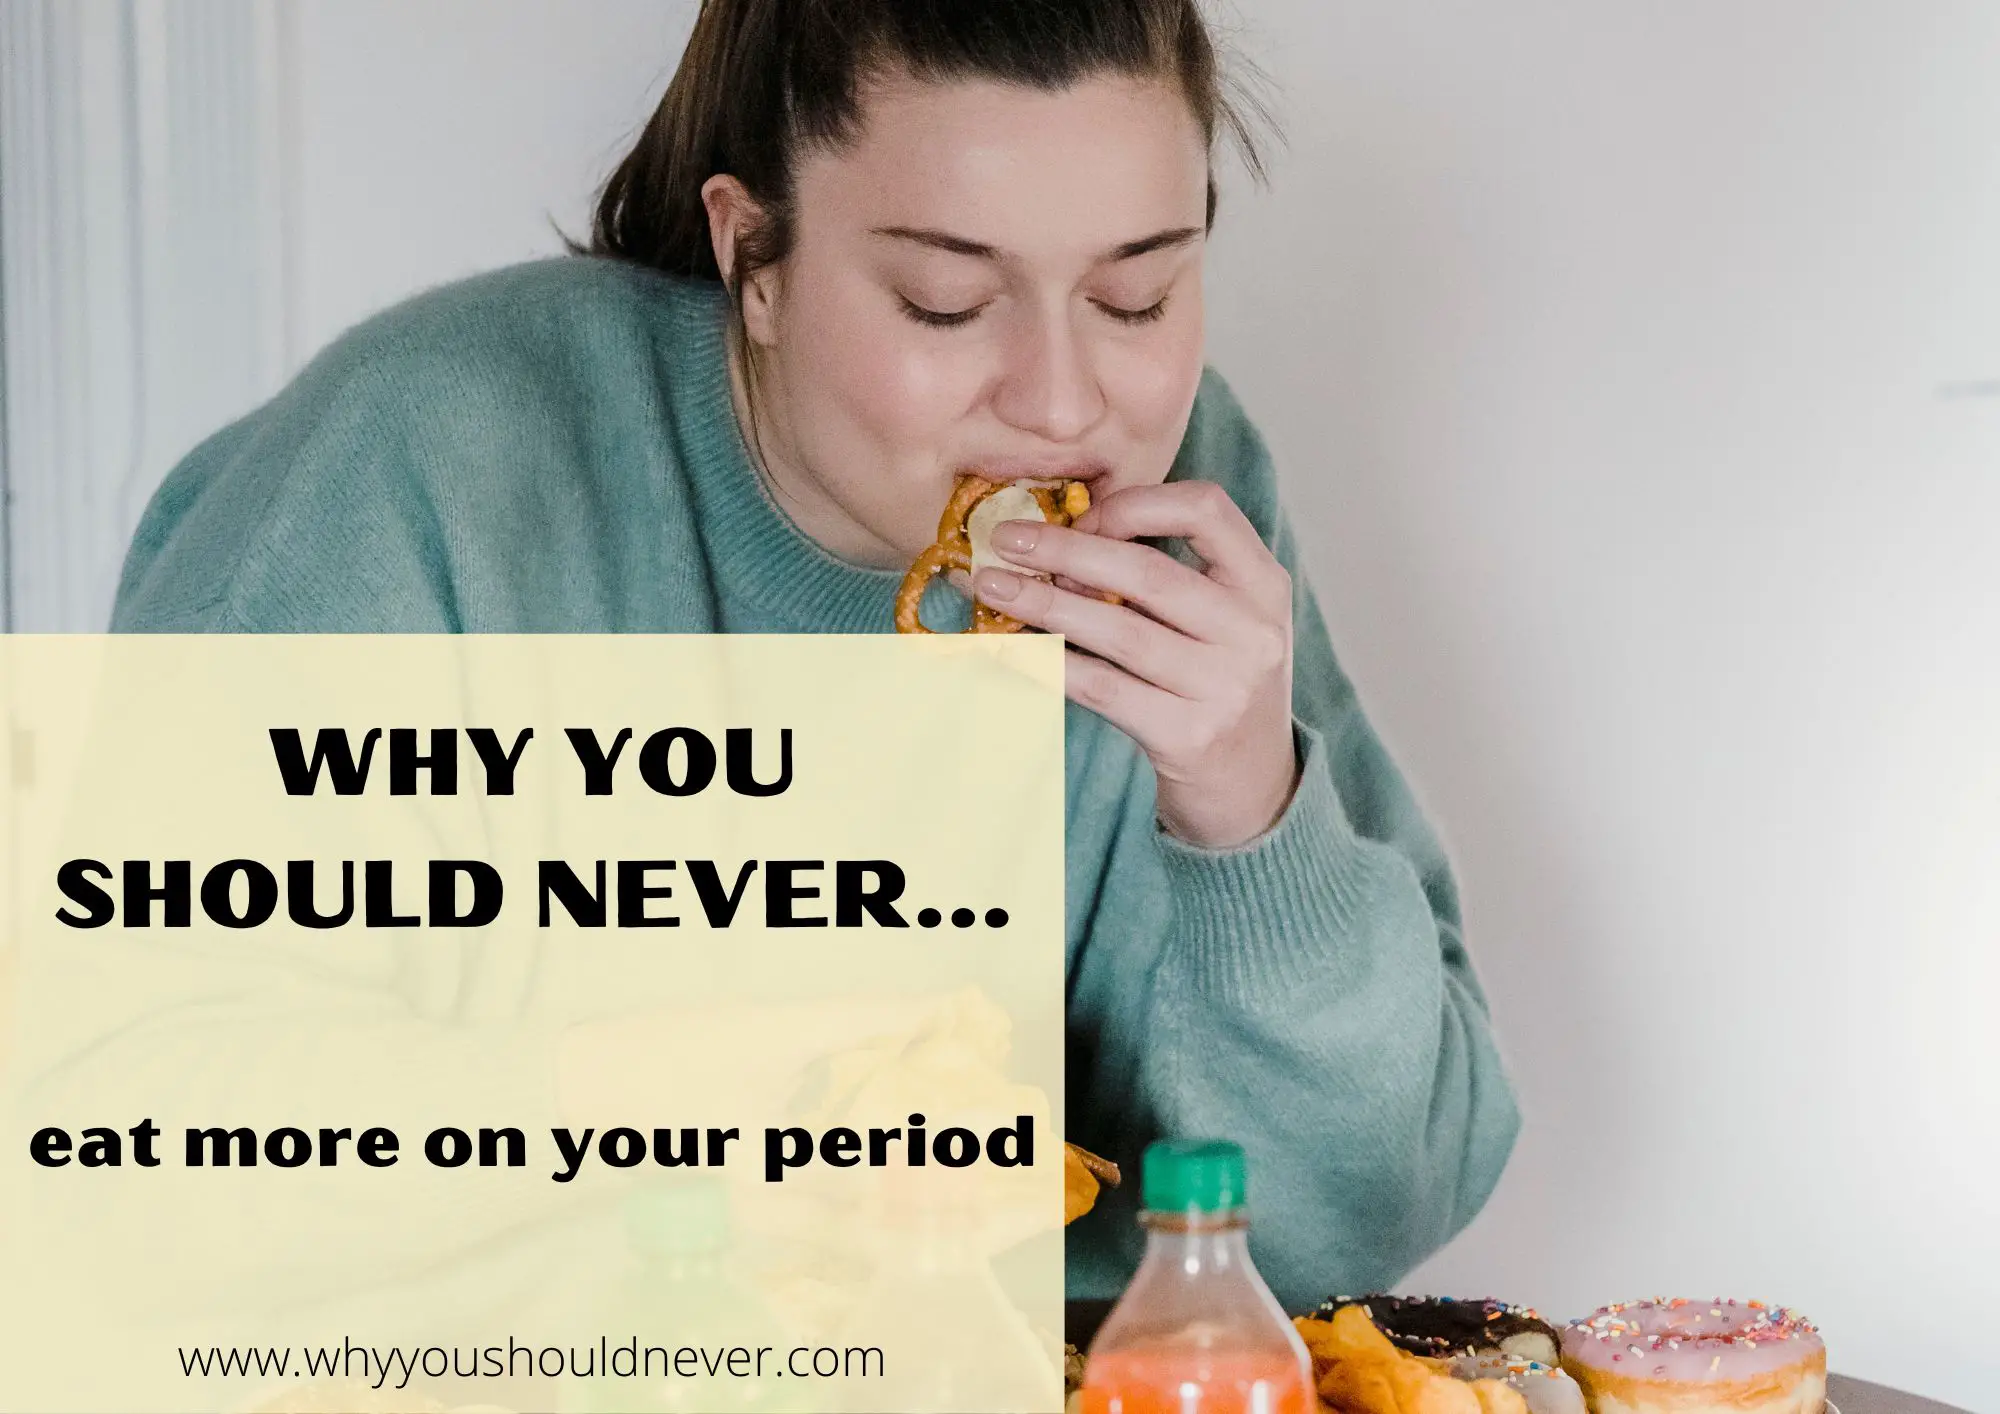 Why You Should Never Eat More On Your Period